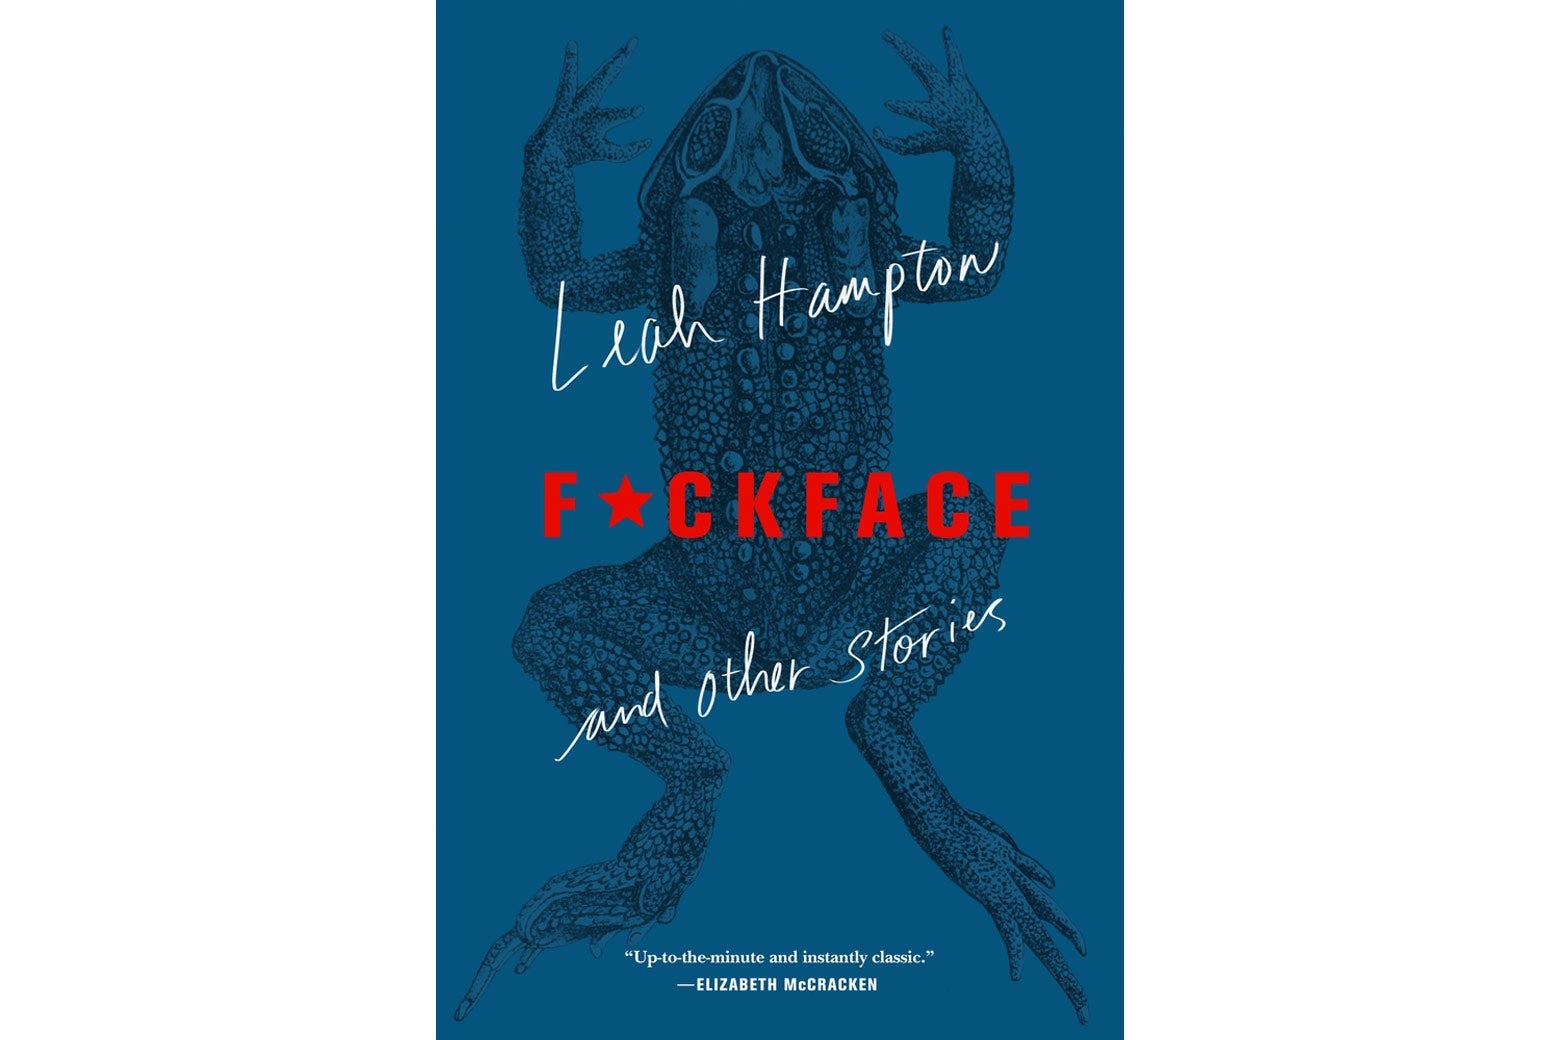 The cover of F*ckface and Other Stories.